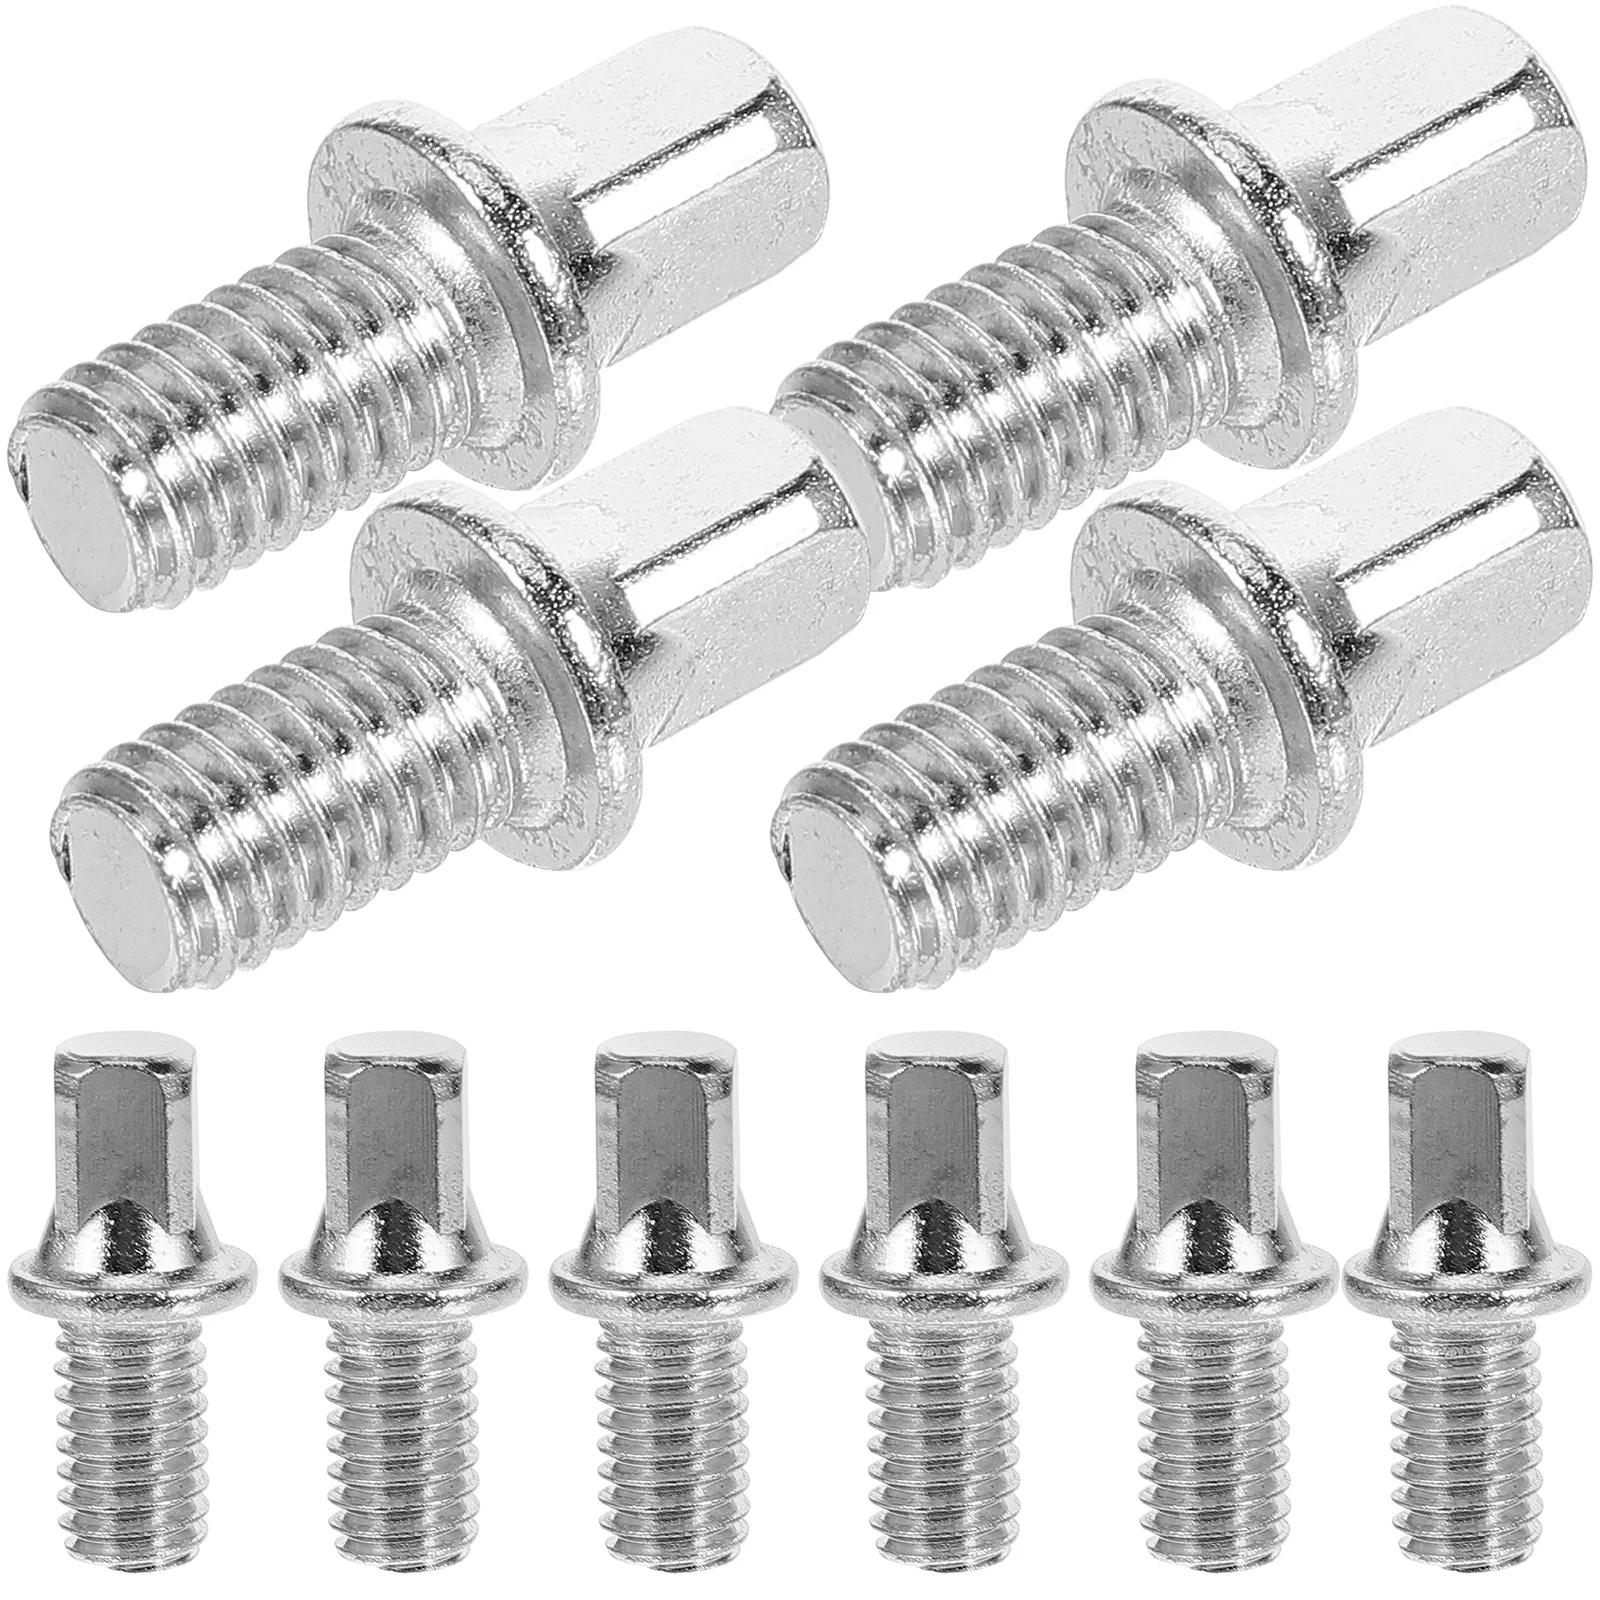 

Drum Tension Rods Key Bolt M6x10mm Snare Drum Screw Drum Bolt Supply For Pedal Shaft Drum Replaces Accessories